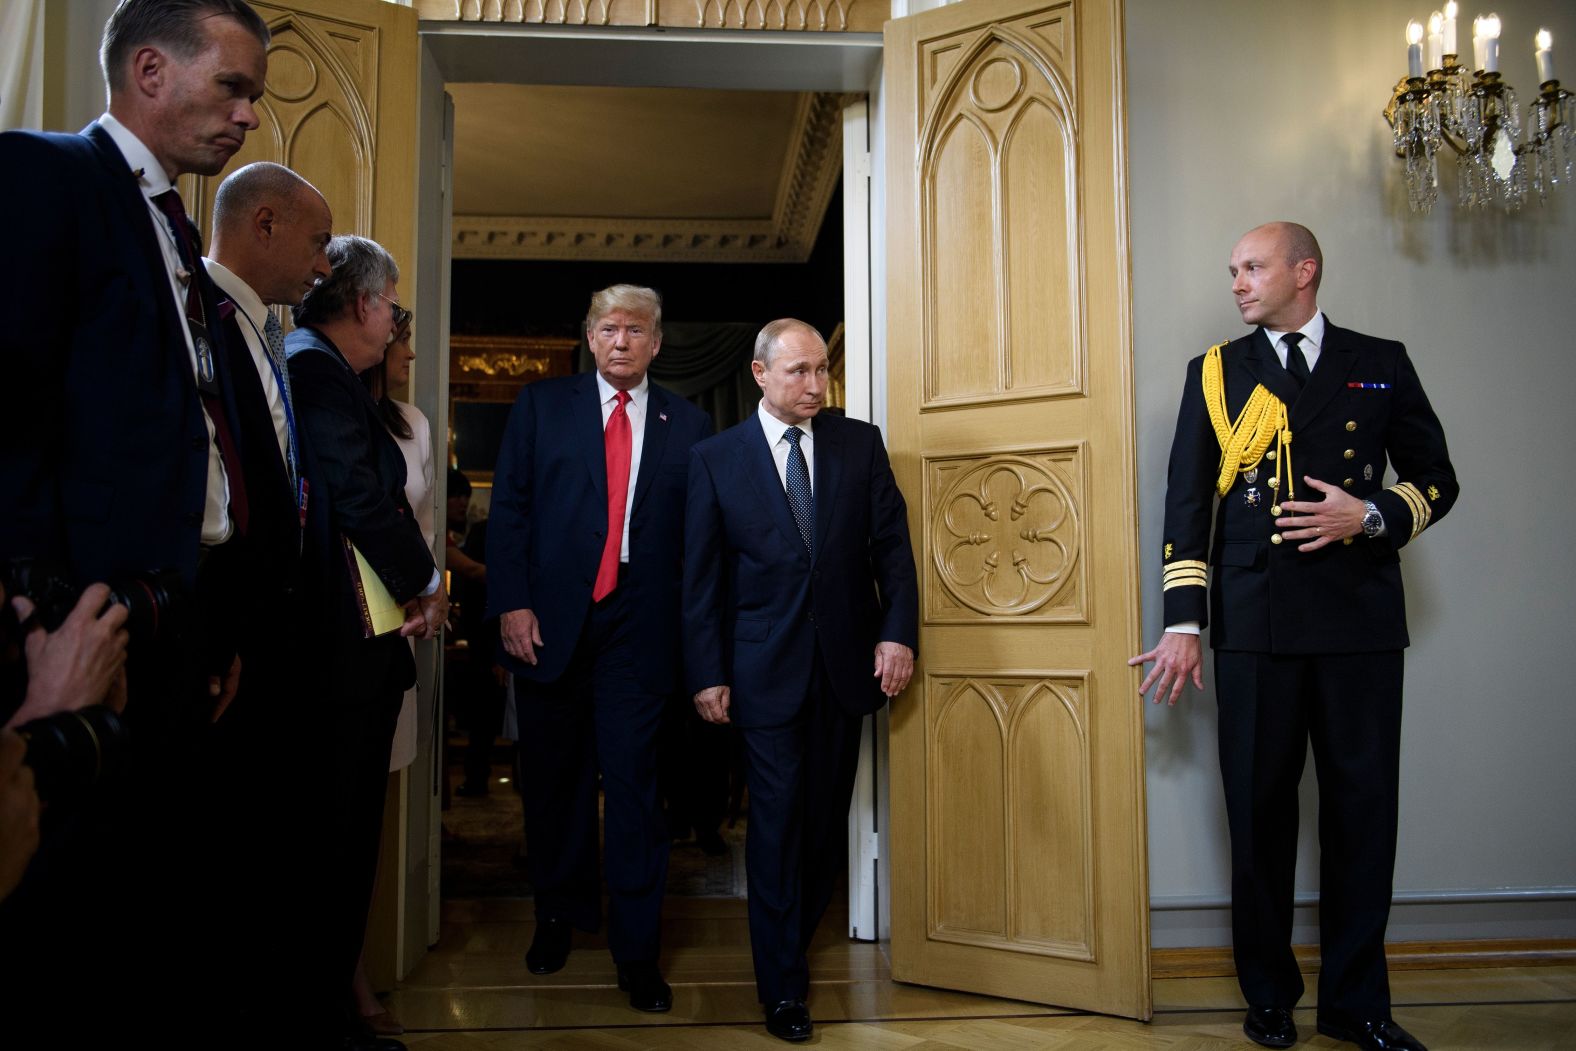 Trump and Russian President Vladimir Putin arrive for <a href="https://www.cnn.com/interactive/2018/07/politics/trump-putin-summit-cnnphotos/" target="_blank">their summit</a> in Helsinki, Finland, on July 16. "Our relationship has never been worse than it is now. However, that changed as of about four hours ago. I really believe that," Trump said at <a href="https://www.cnn.com/politics/live-news/trump-putin-helsinki/h_569a52a7d2dc362ff45aefd8d24ce16c" target="_blank">a joint news conference</a> held at the end of the summit.